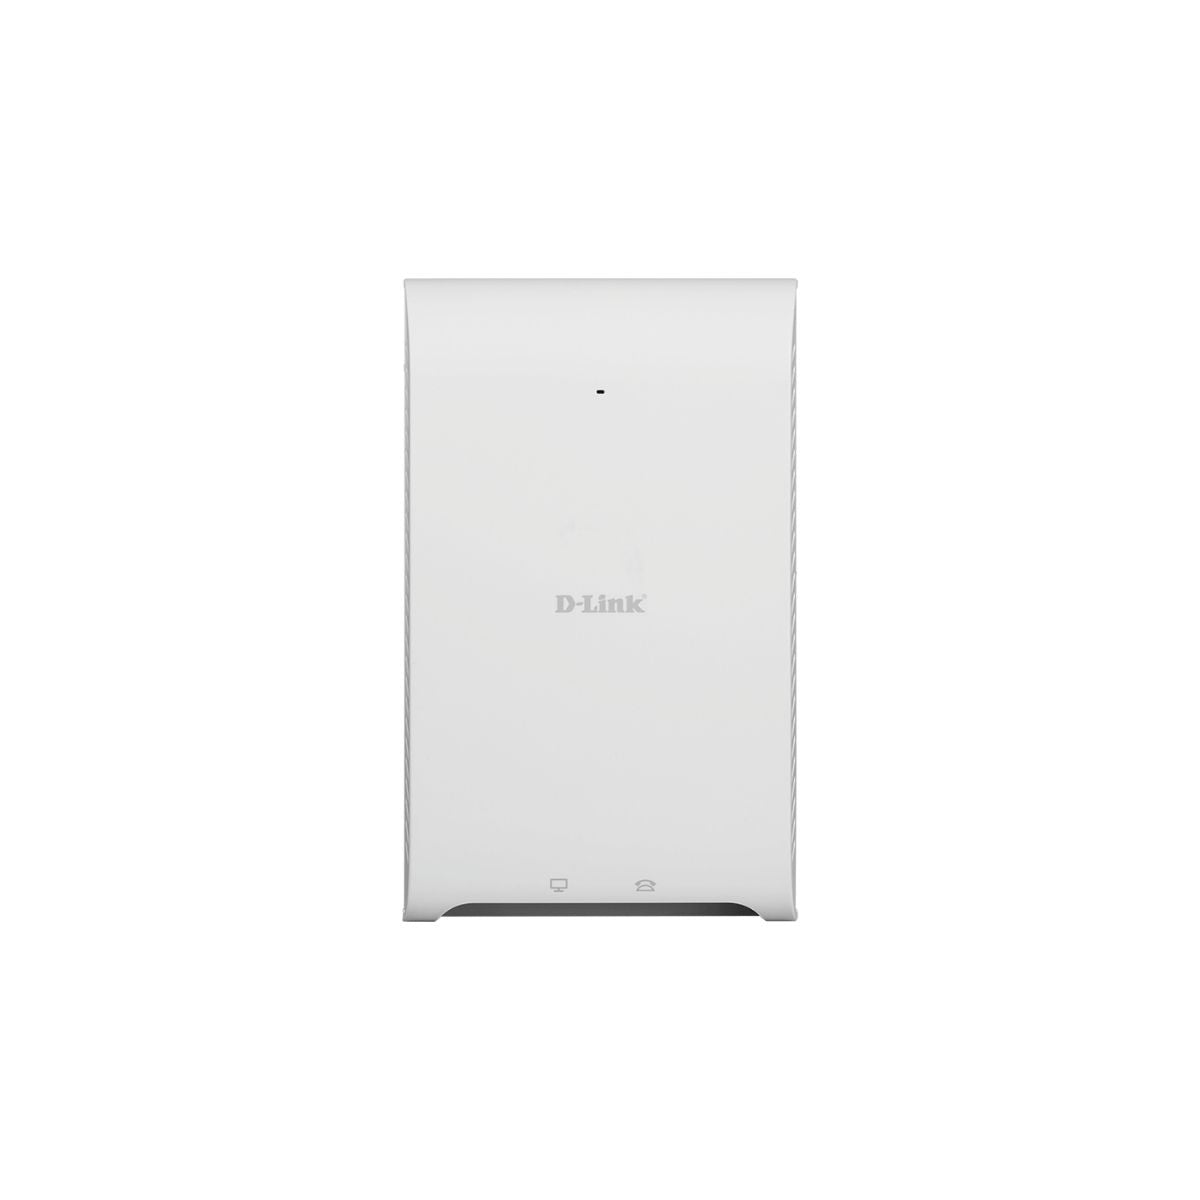 D-Link Nuclias Connect AC1200 Wave 2 Wall-Plate Access Point DAP-2620 - Ooberpad